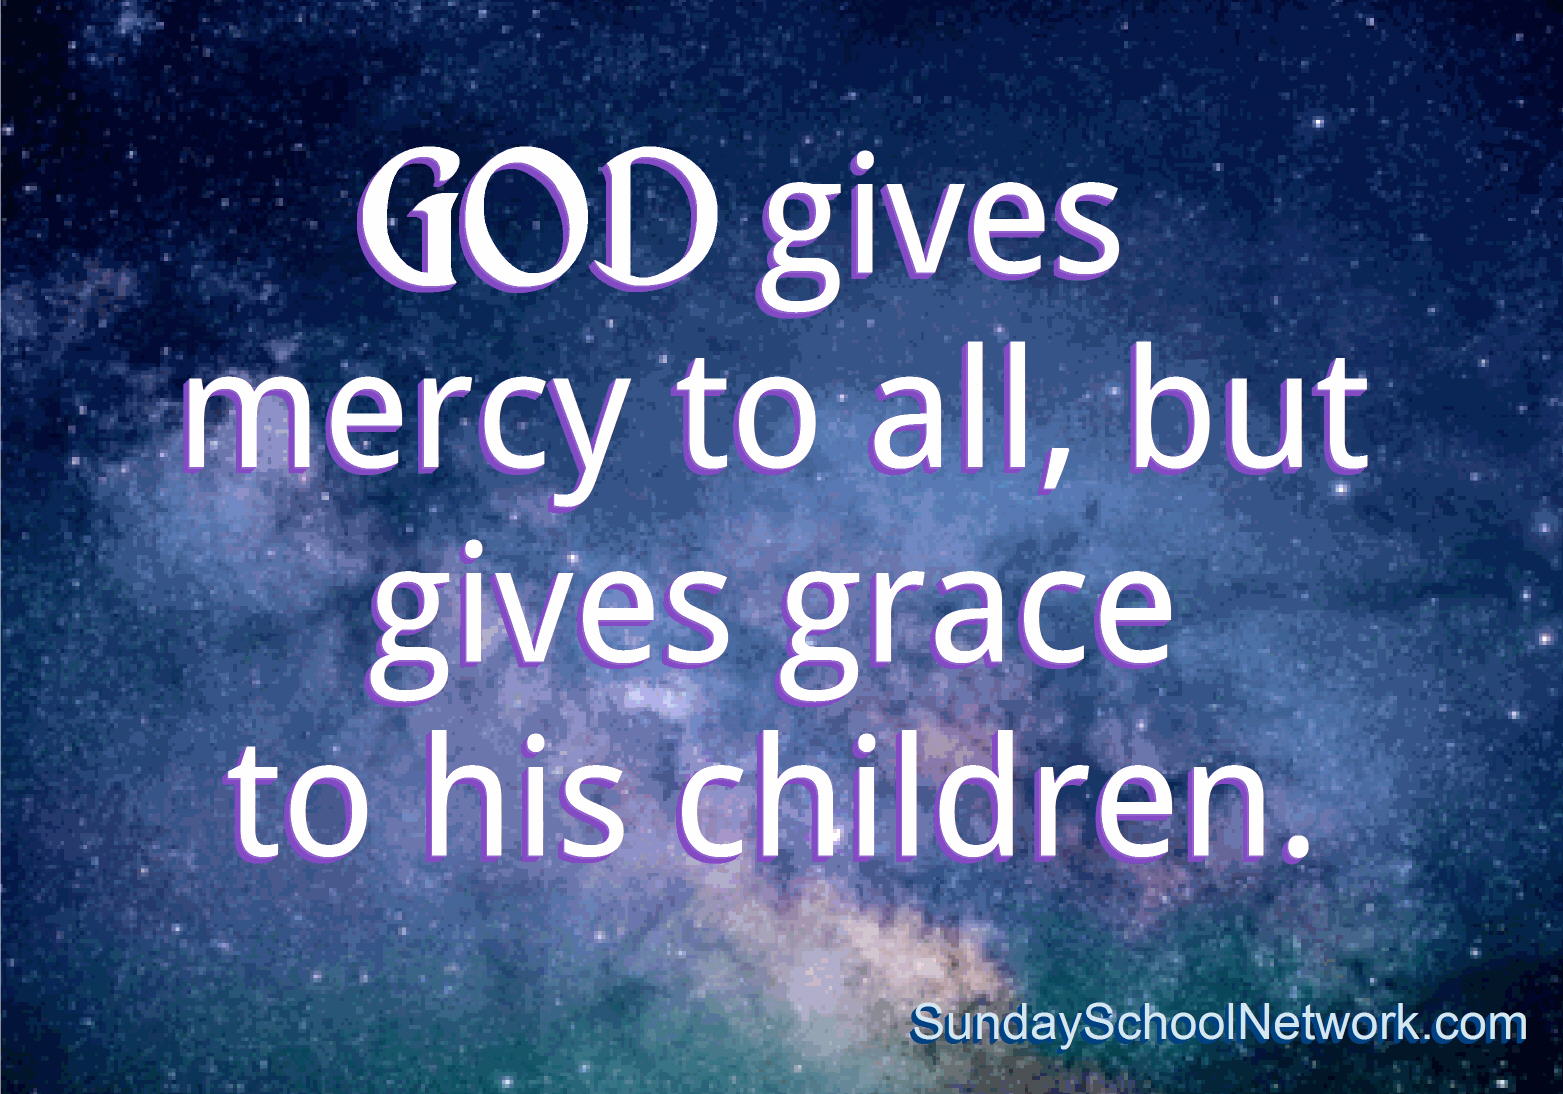 God gives grace to his children